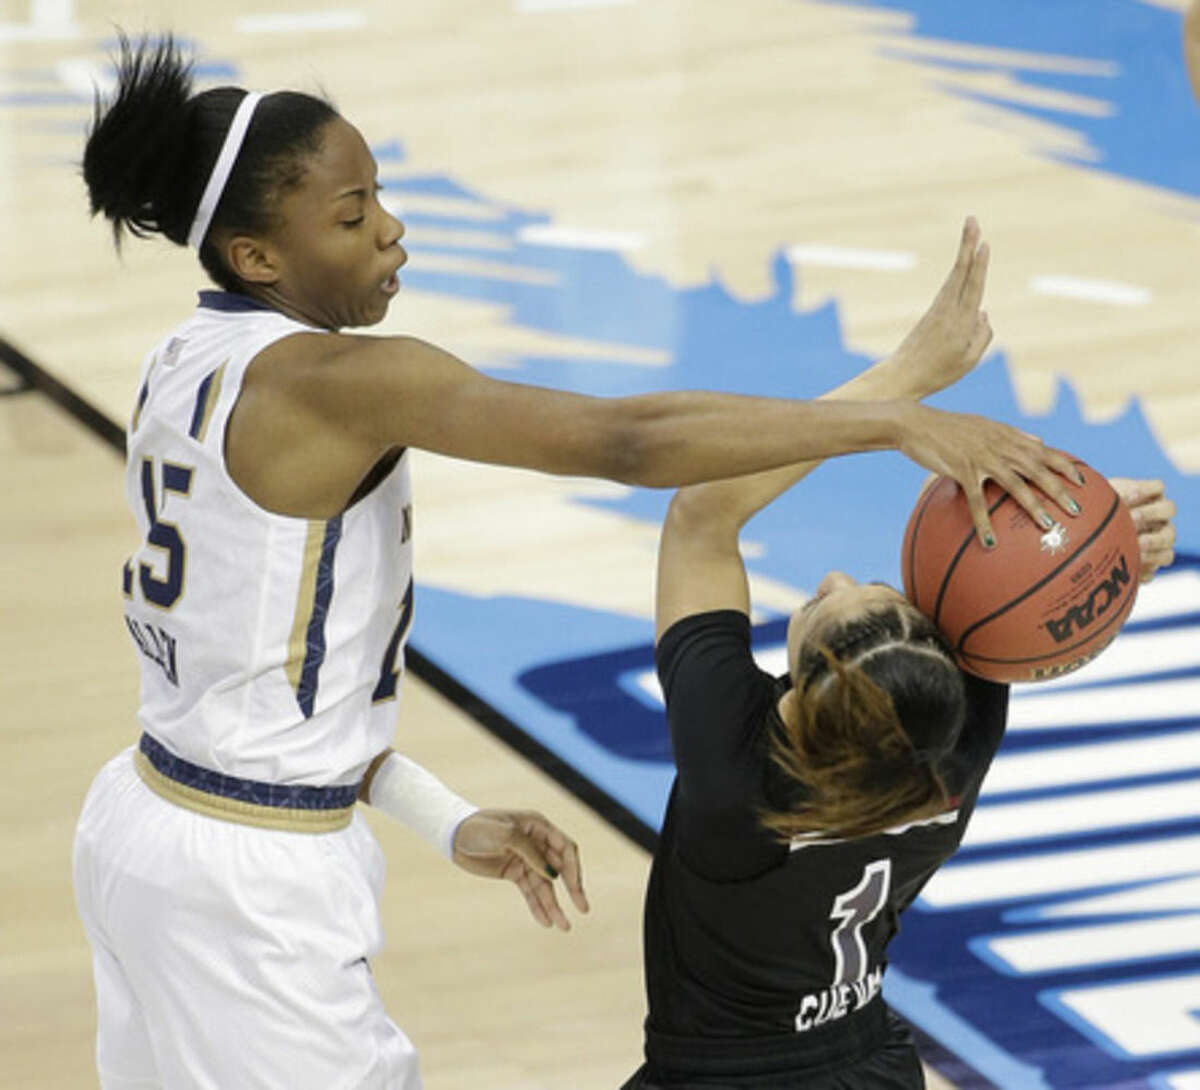 Notre Dame guard Lindsay Allen (15) hits the ball against South Carolina guard Bianca Cuevas (1) during the first half of the NCAA Women's Final Four tournament college basketball semifinal game, Sunday, April 5, 2015, in Tampa, Fla. (AP Photo/Chris O'Meara)